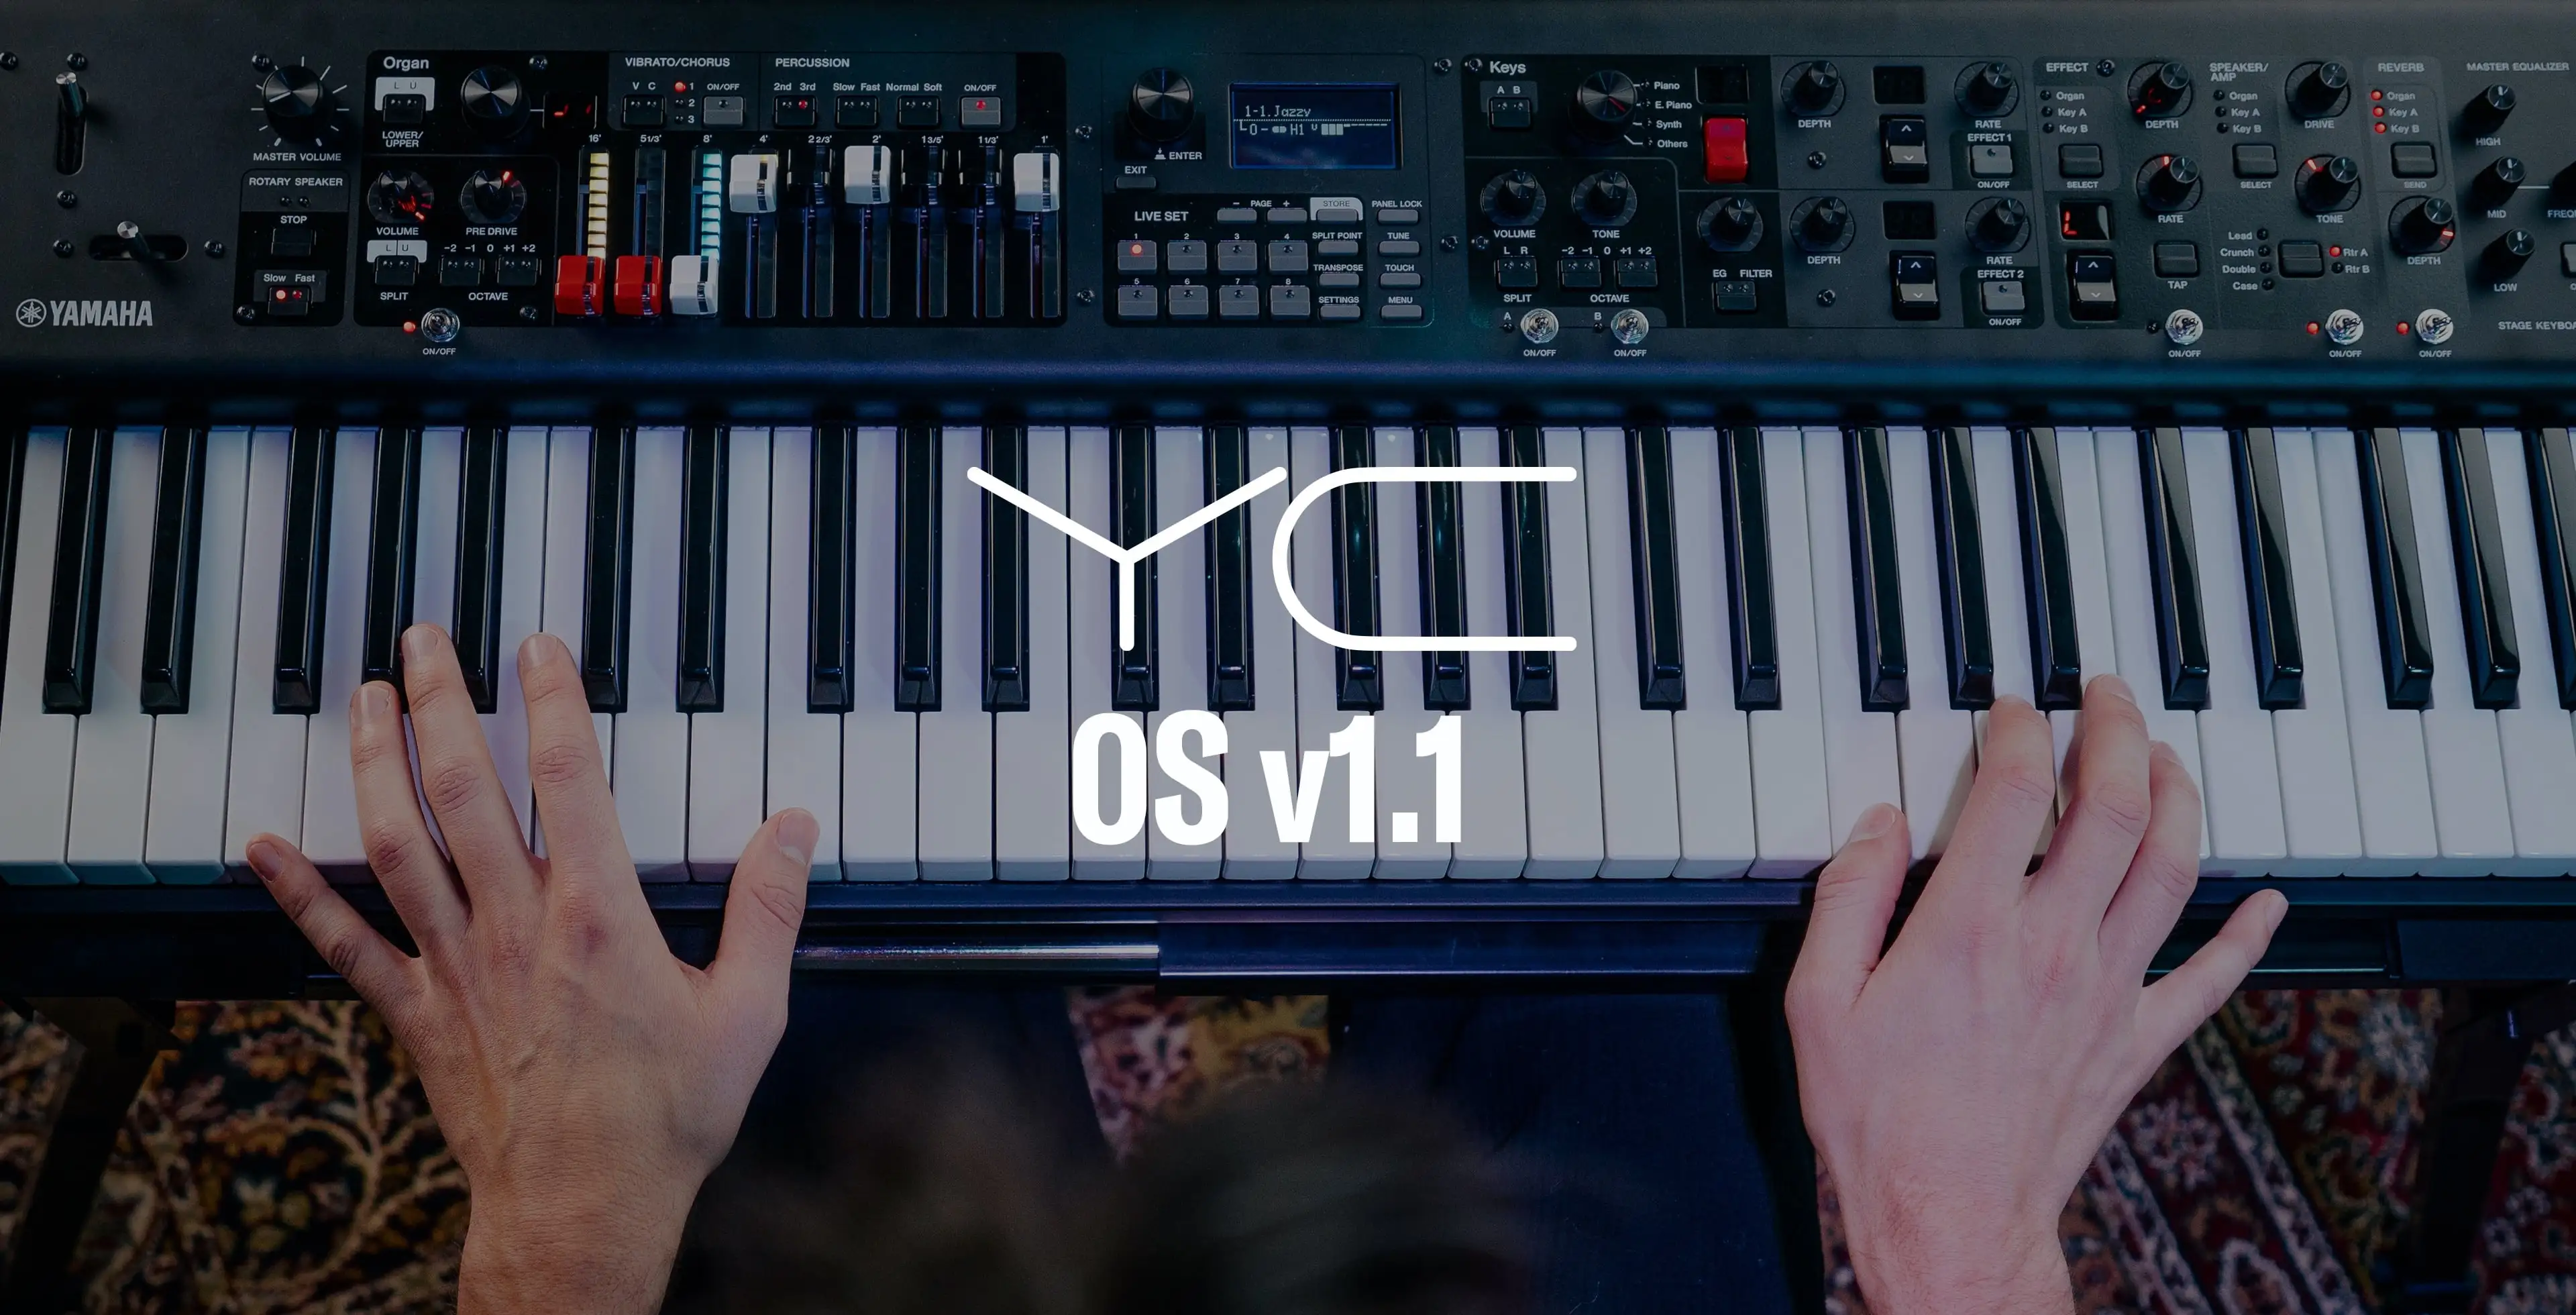 Yamaha’s YC Stage Keyboards Receive Significant New OS v1.1 Update